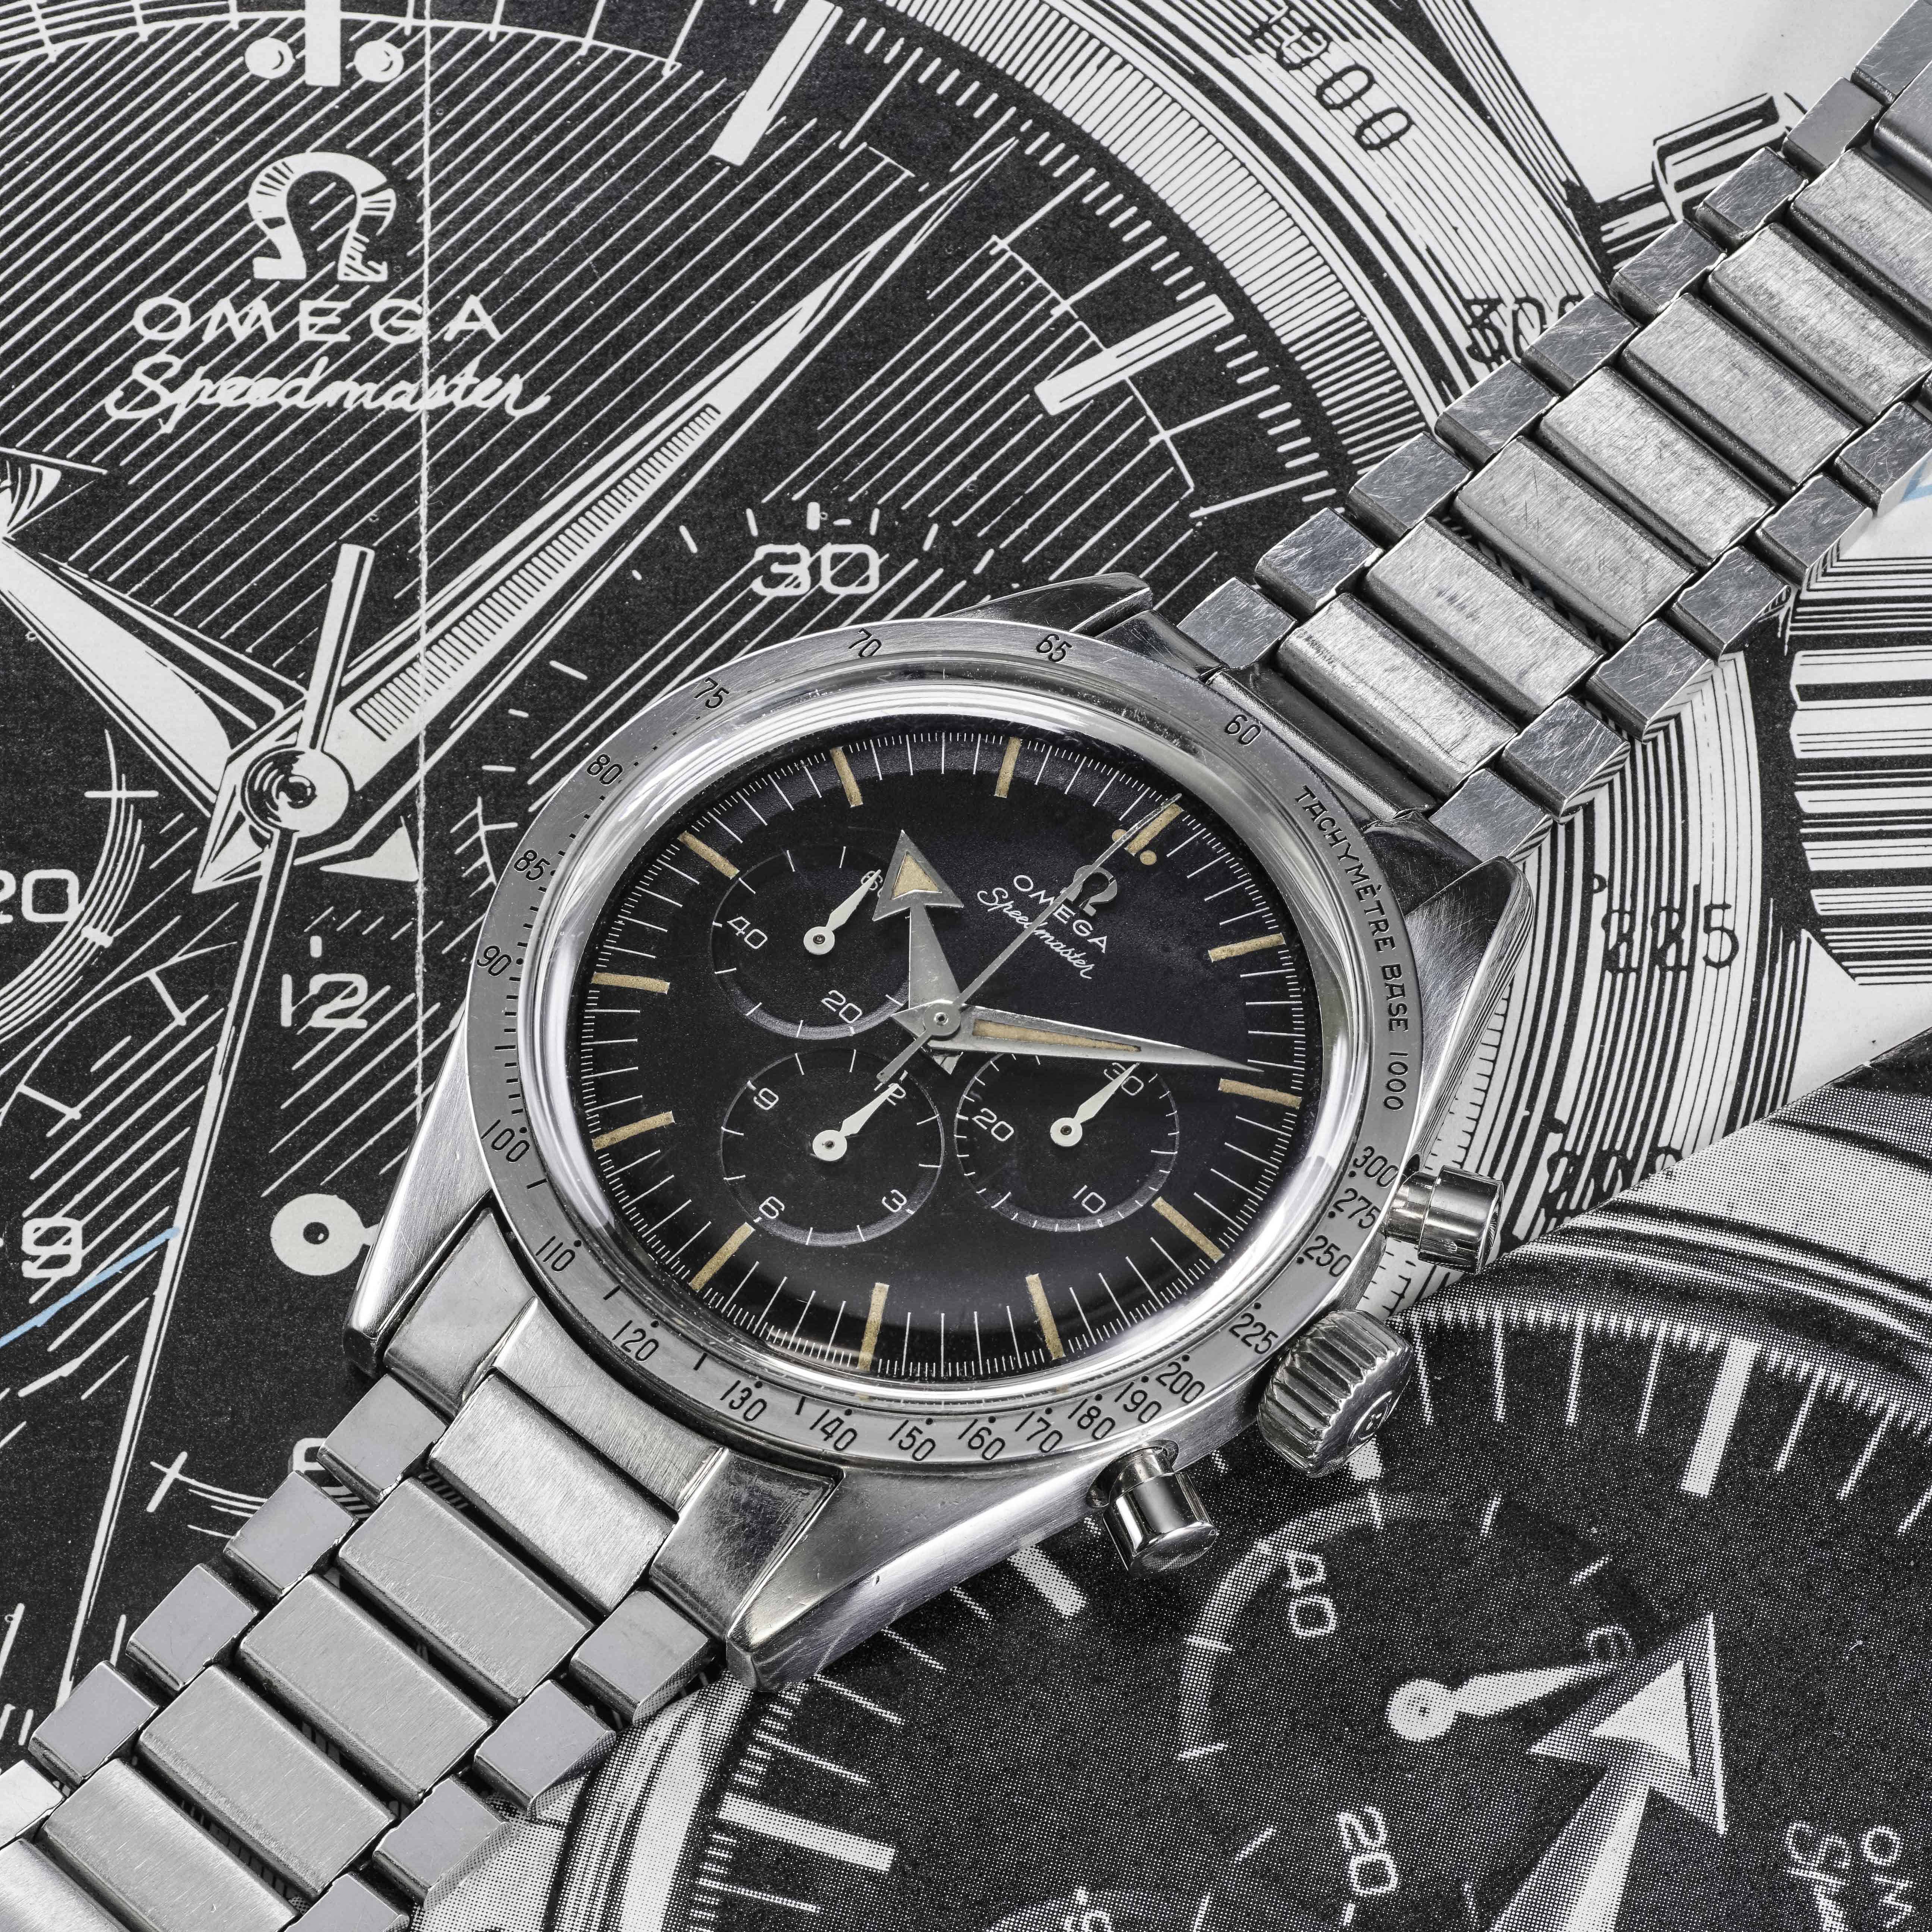 omega most expensive watch price